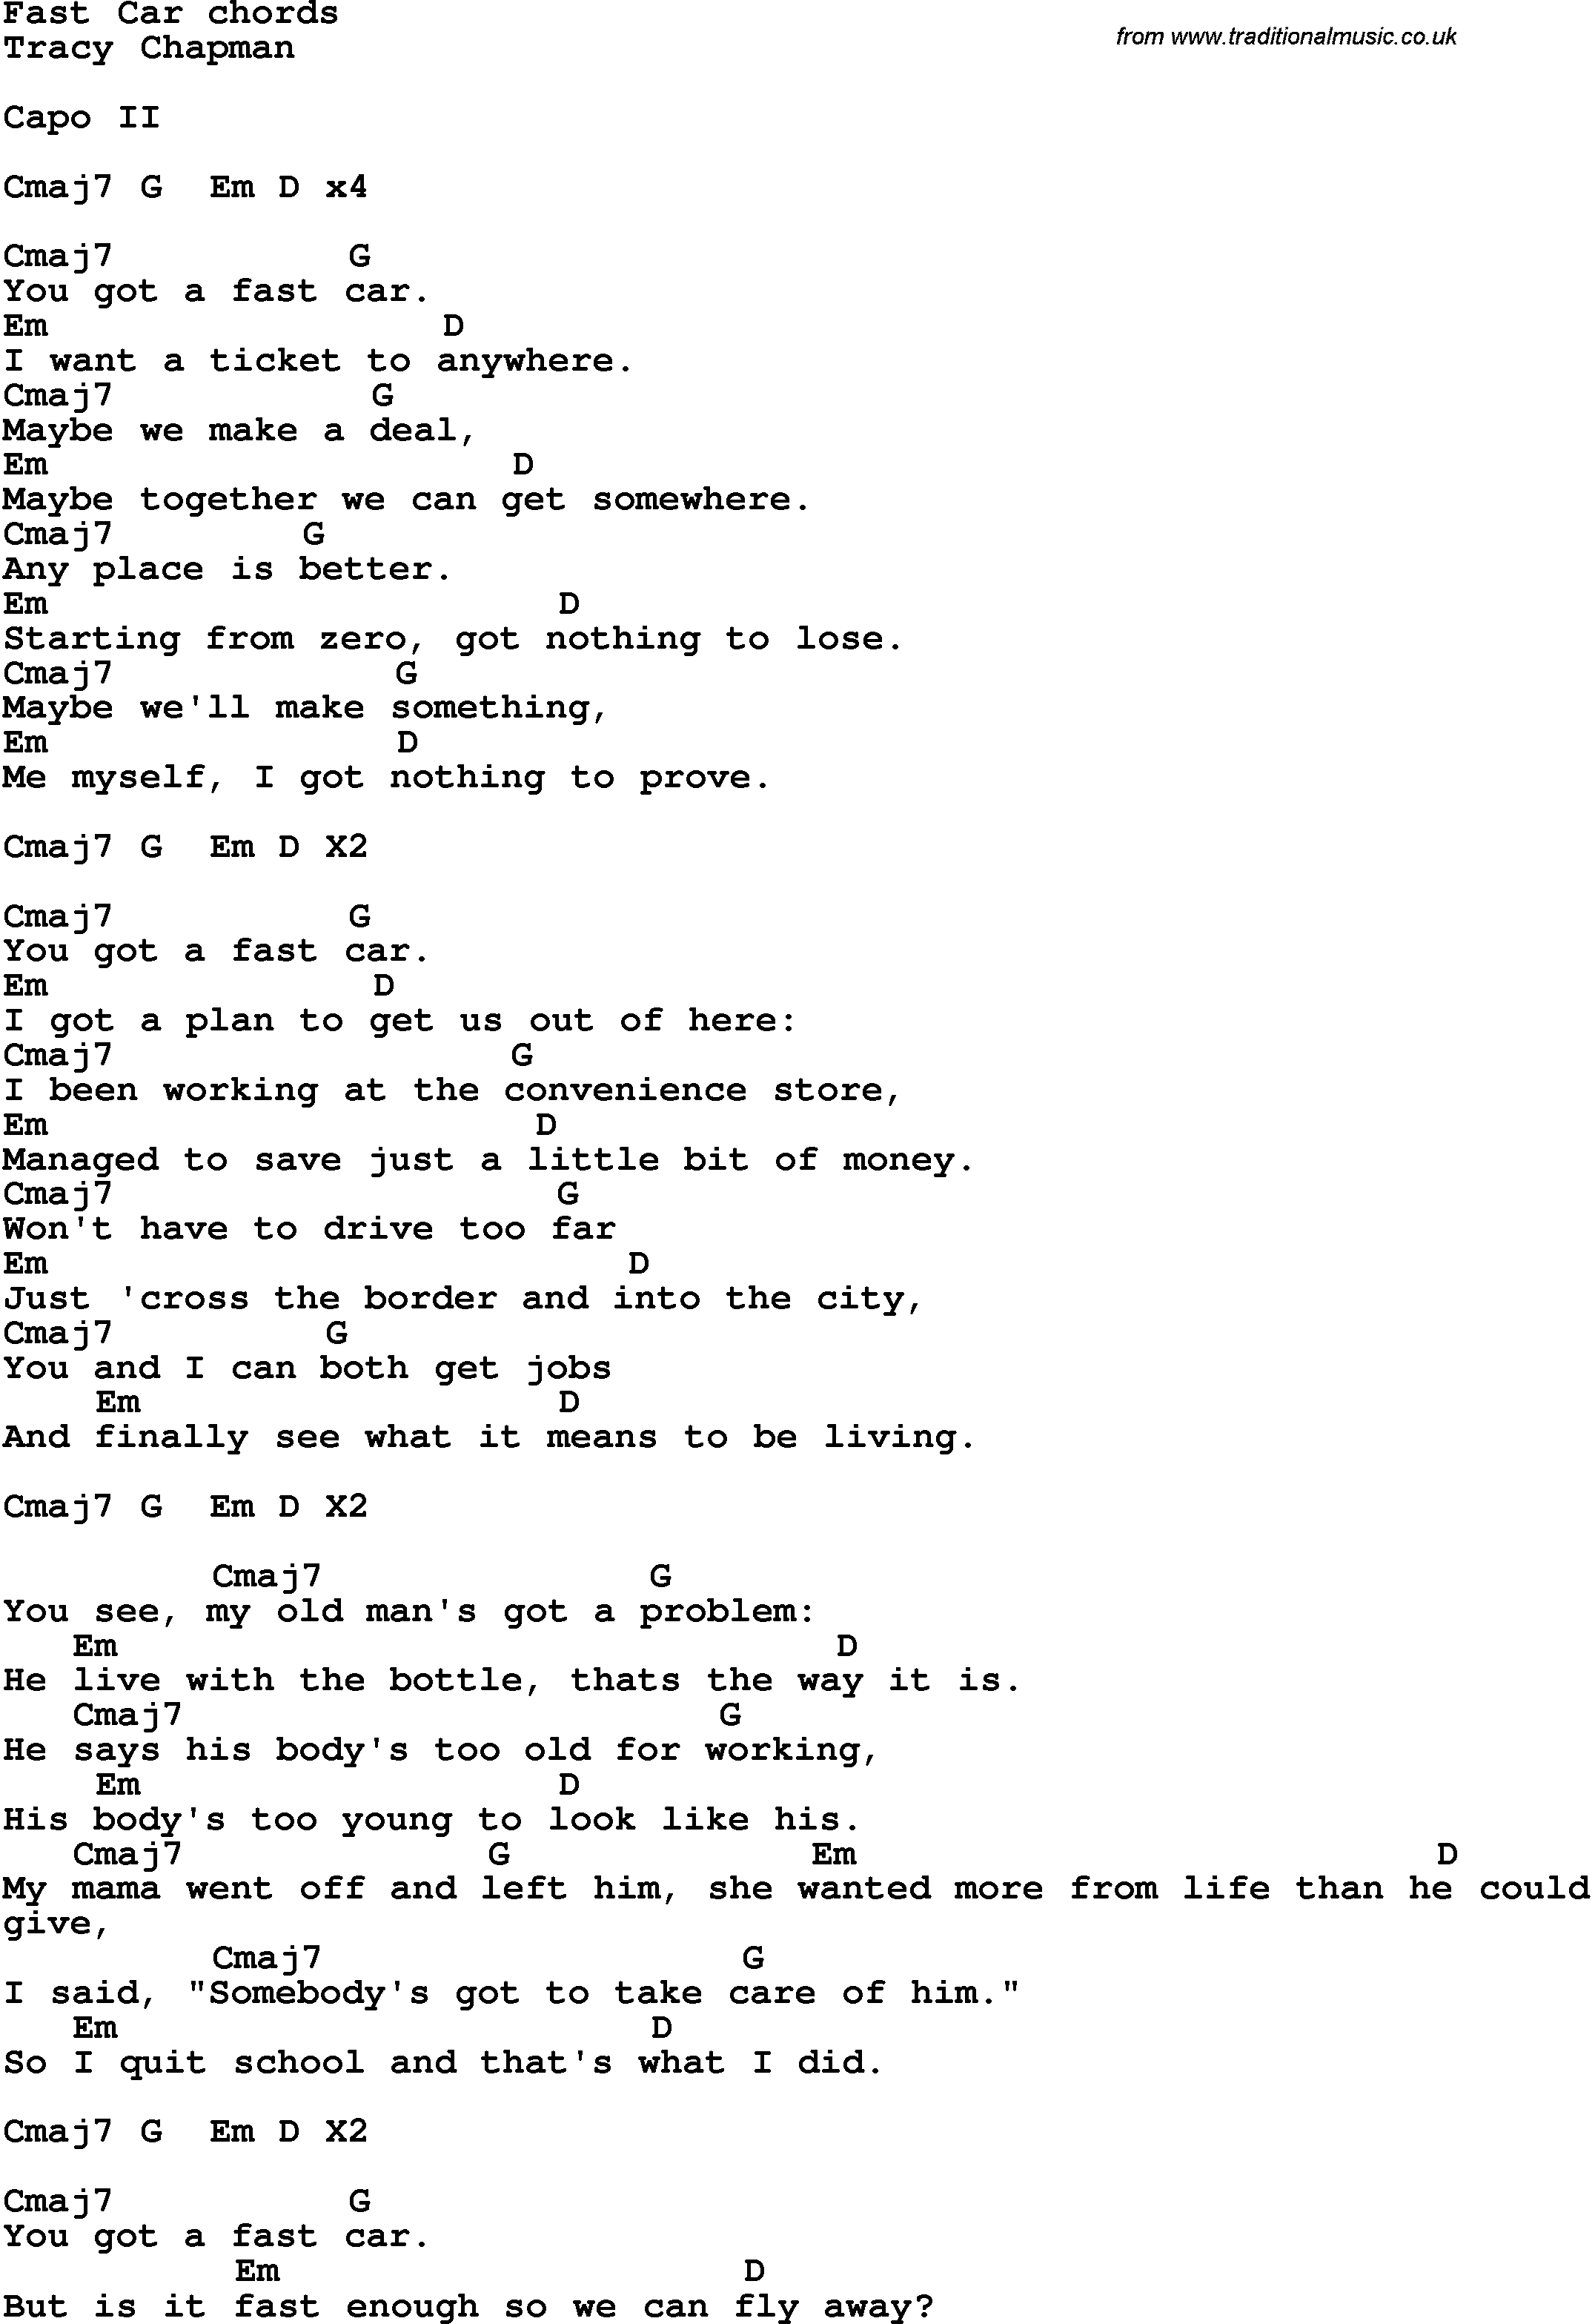 Song Lyrics with guitar chords for Fast Car